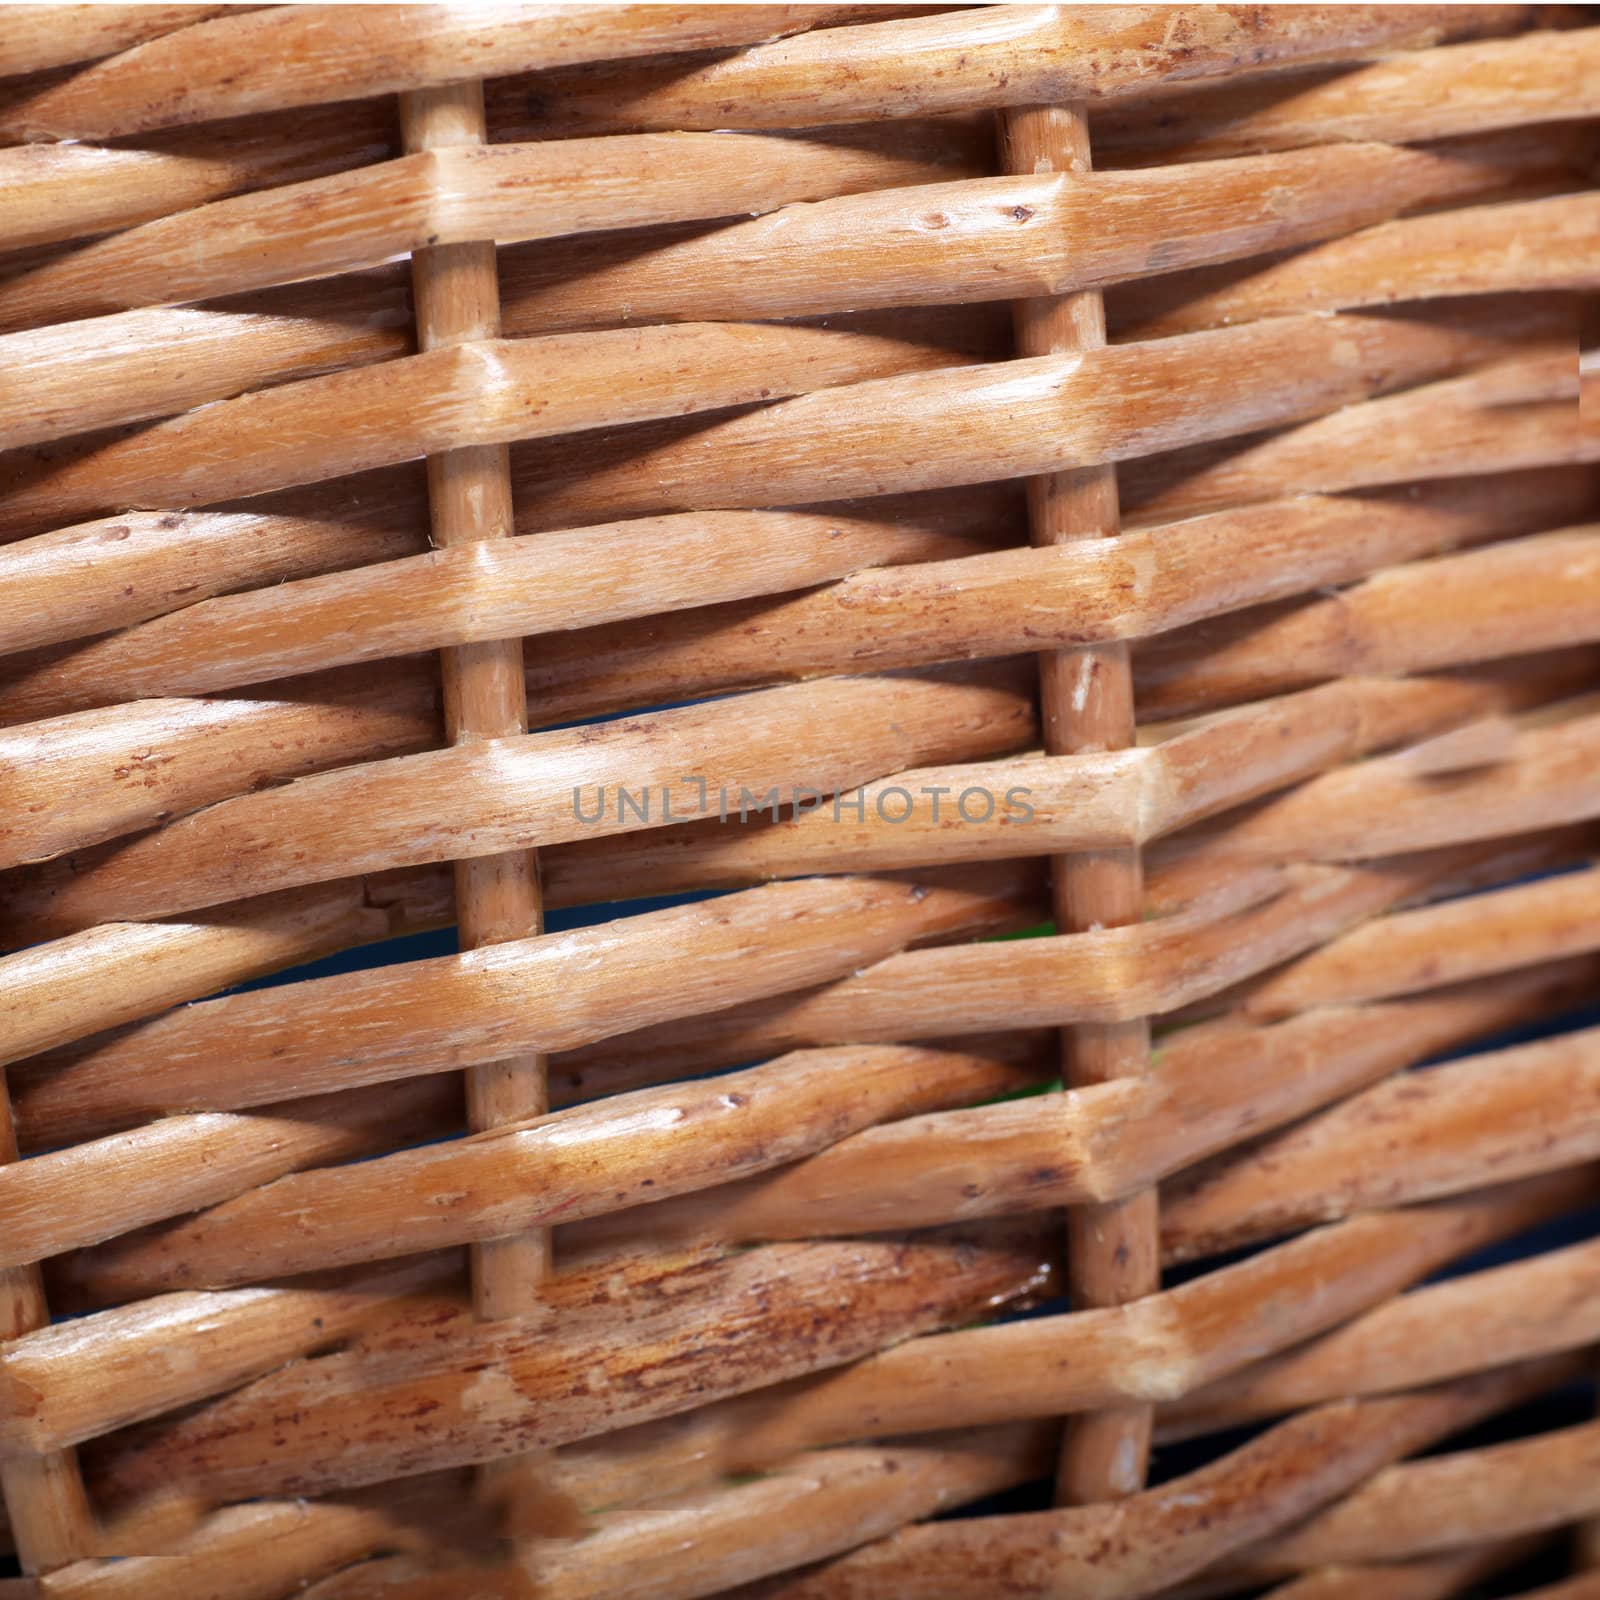 Cane or wickerwork background showing the detailed interlaced structure of the weave on a basket or item of furniture